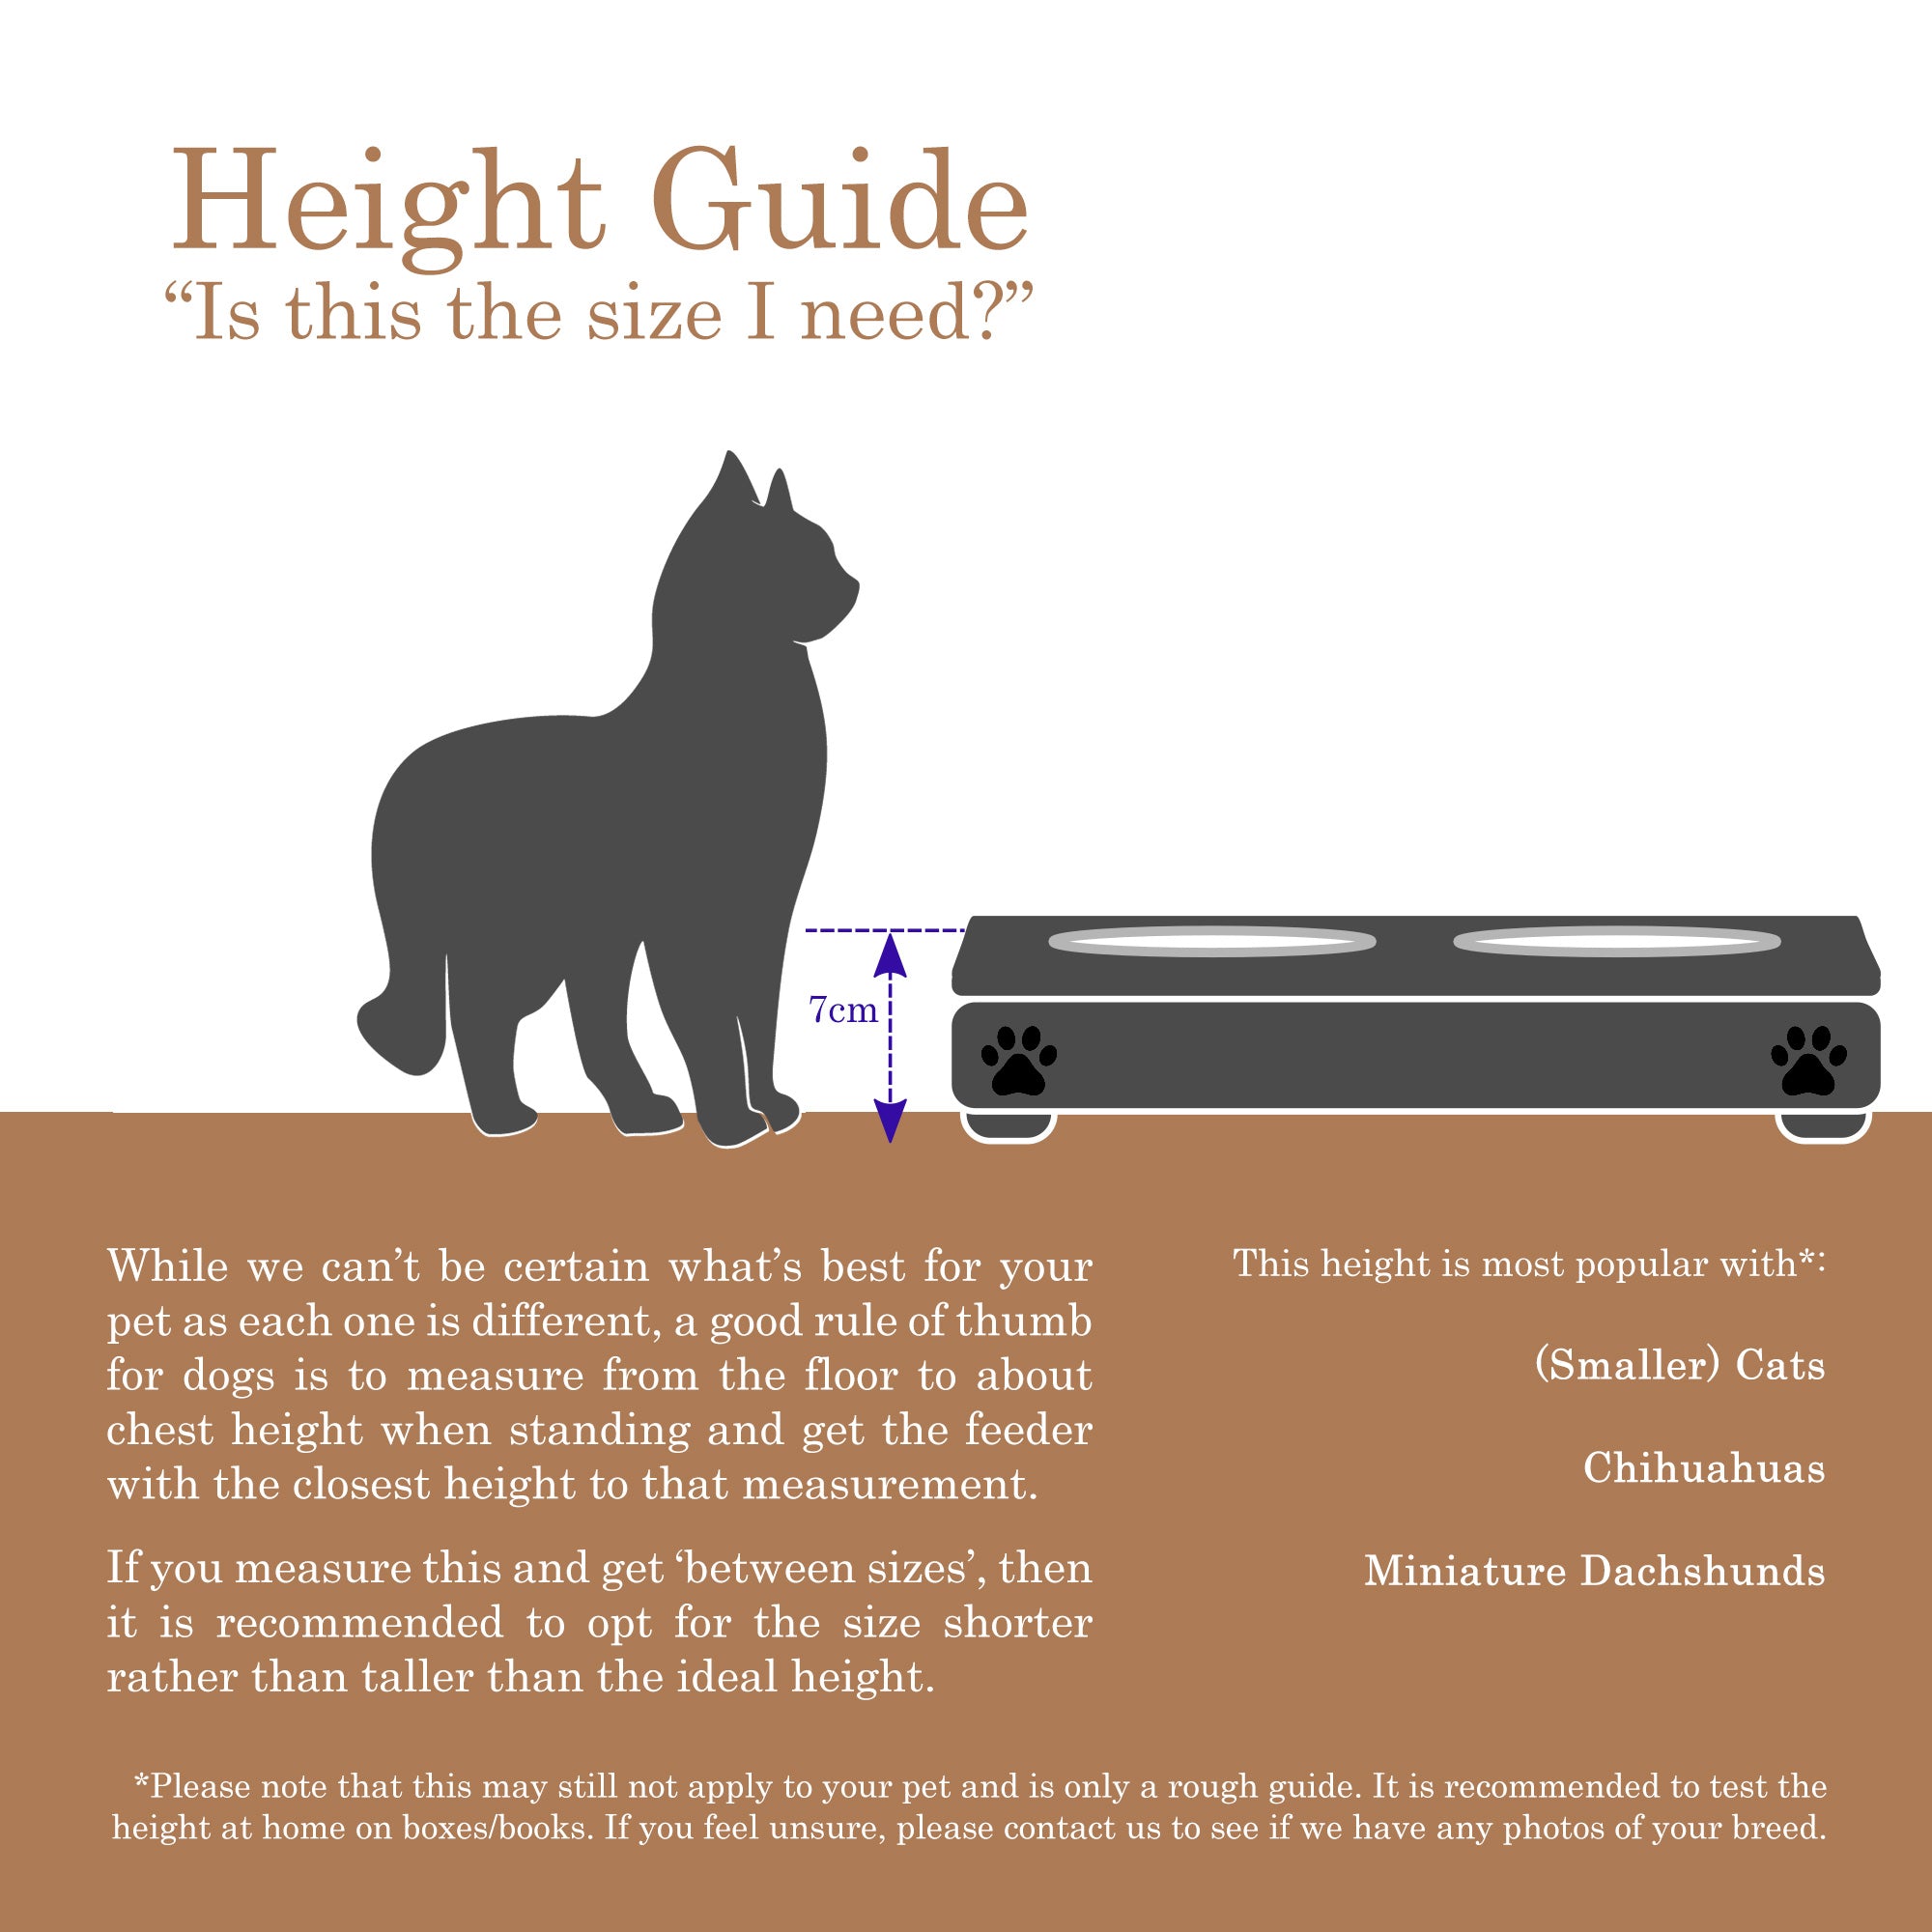 Elevated bowl size. How to measure pet bowl height. What is the best feeding bowl for cats